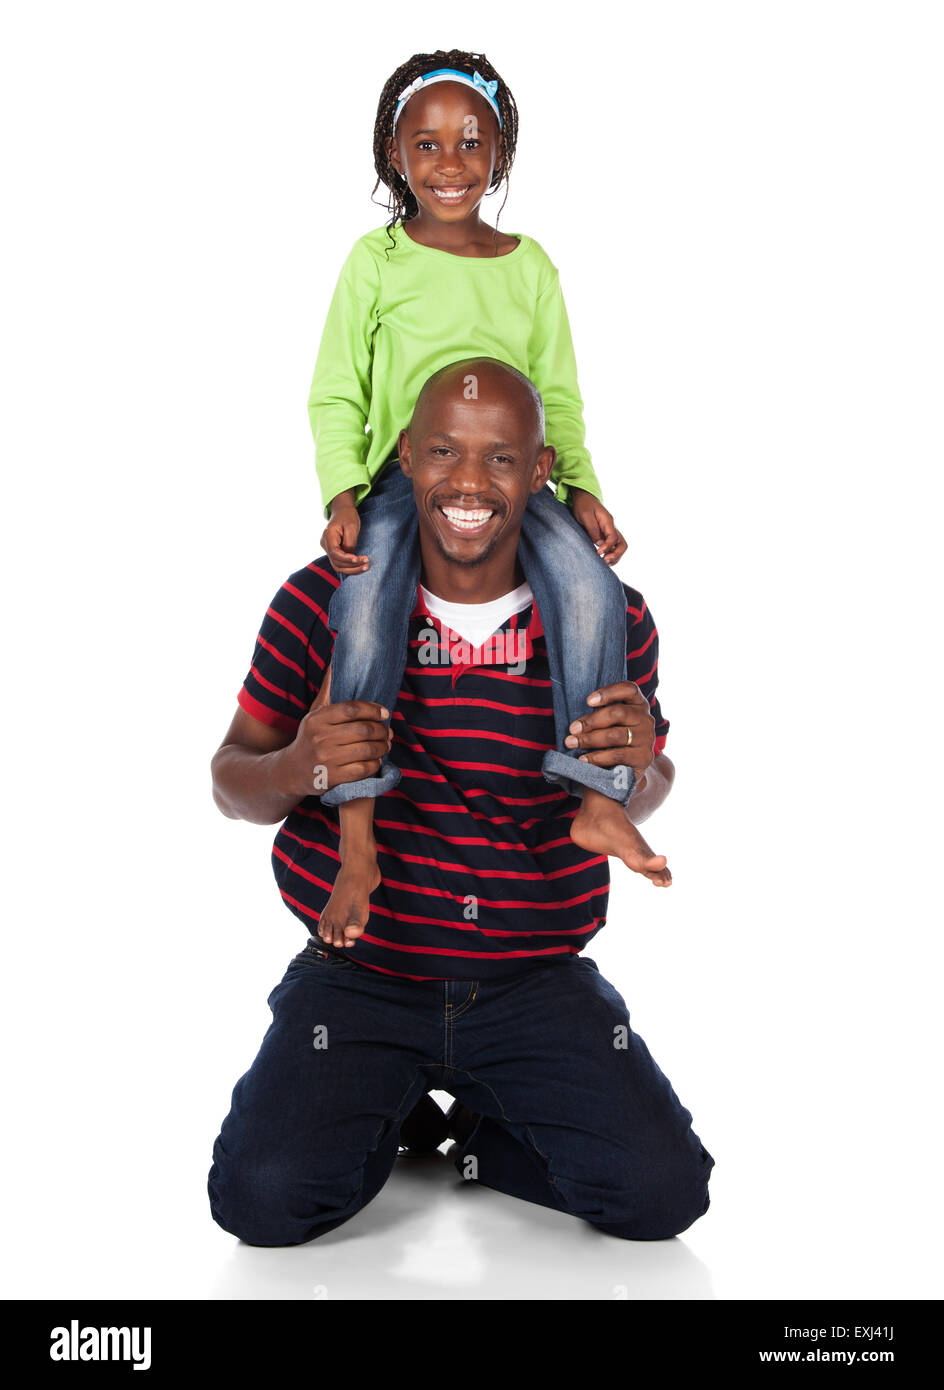 Adorable small african child with braids wearing a bright green shirt and blue jeans is playing with her father. He is wearing a Stock Photo